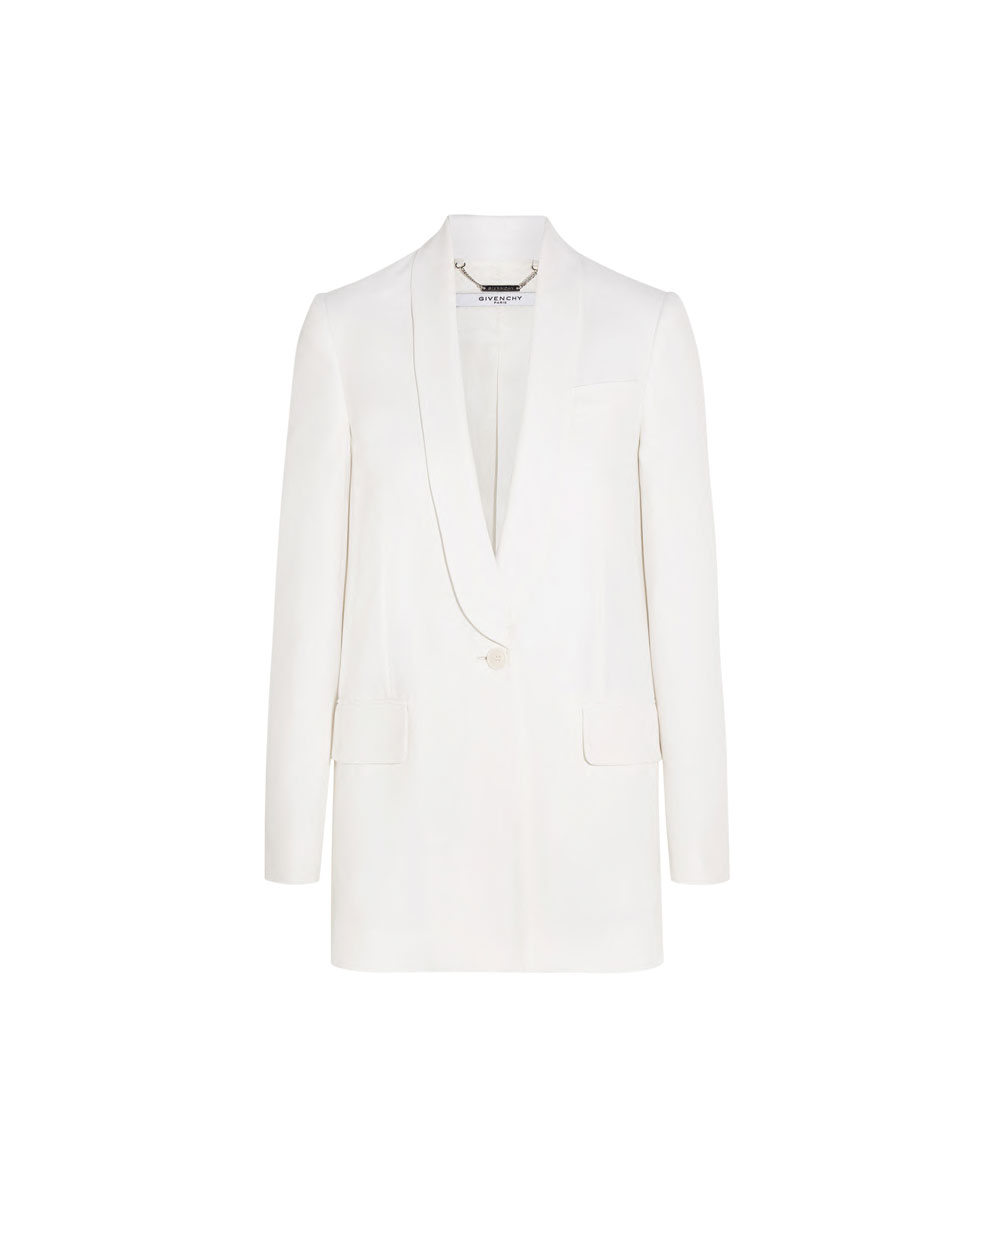 Givenchy jacket, $2656, from Net-a-Porter